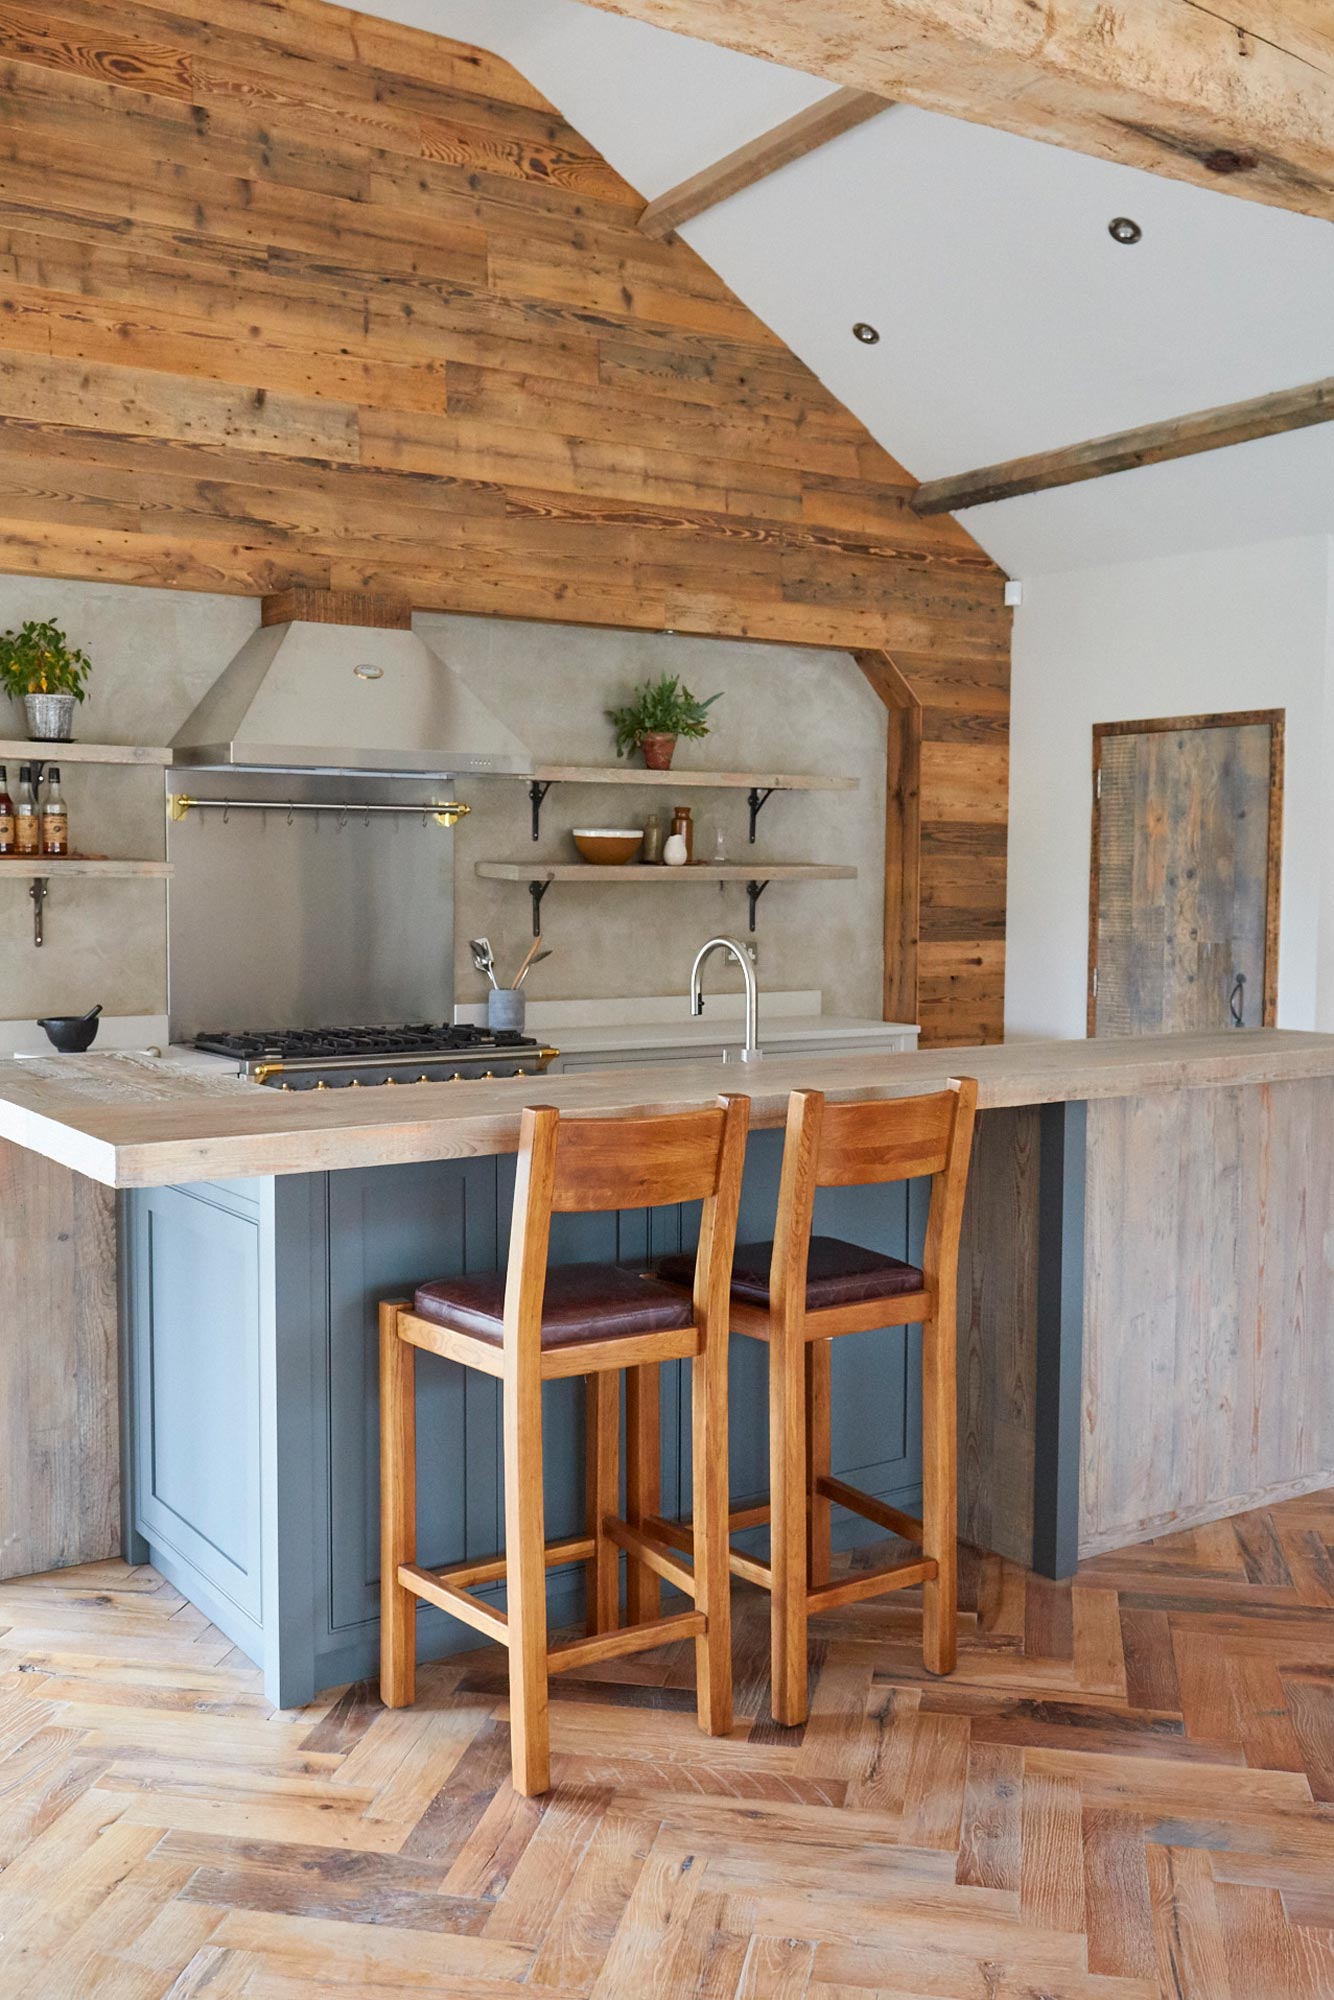 Two oak stools sit under reclaimed pine breakfast bar with painted kitchen cabinets